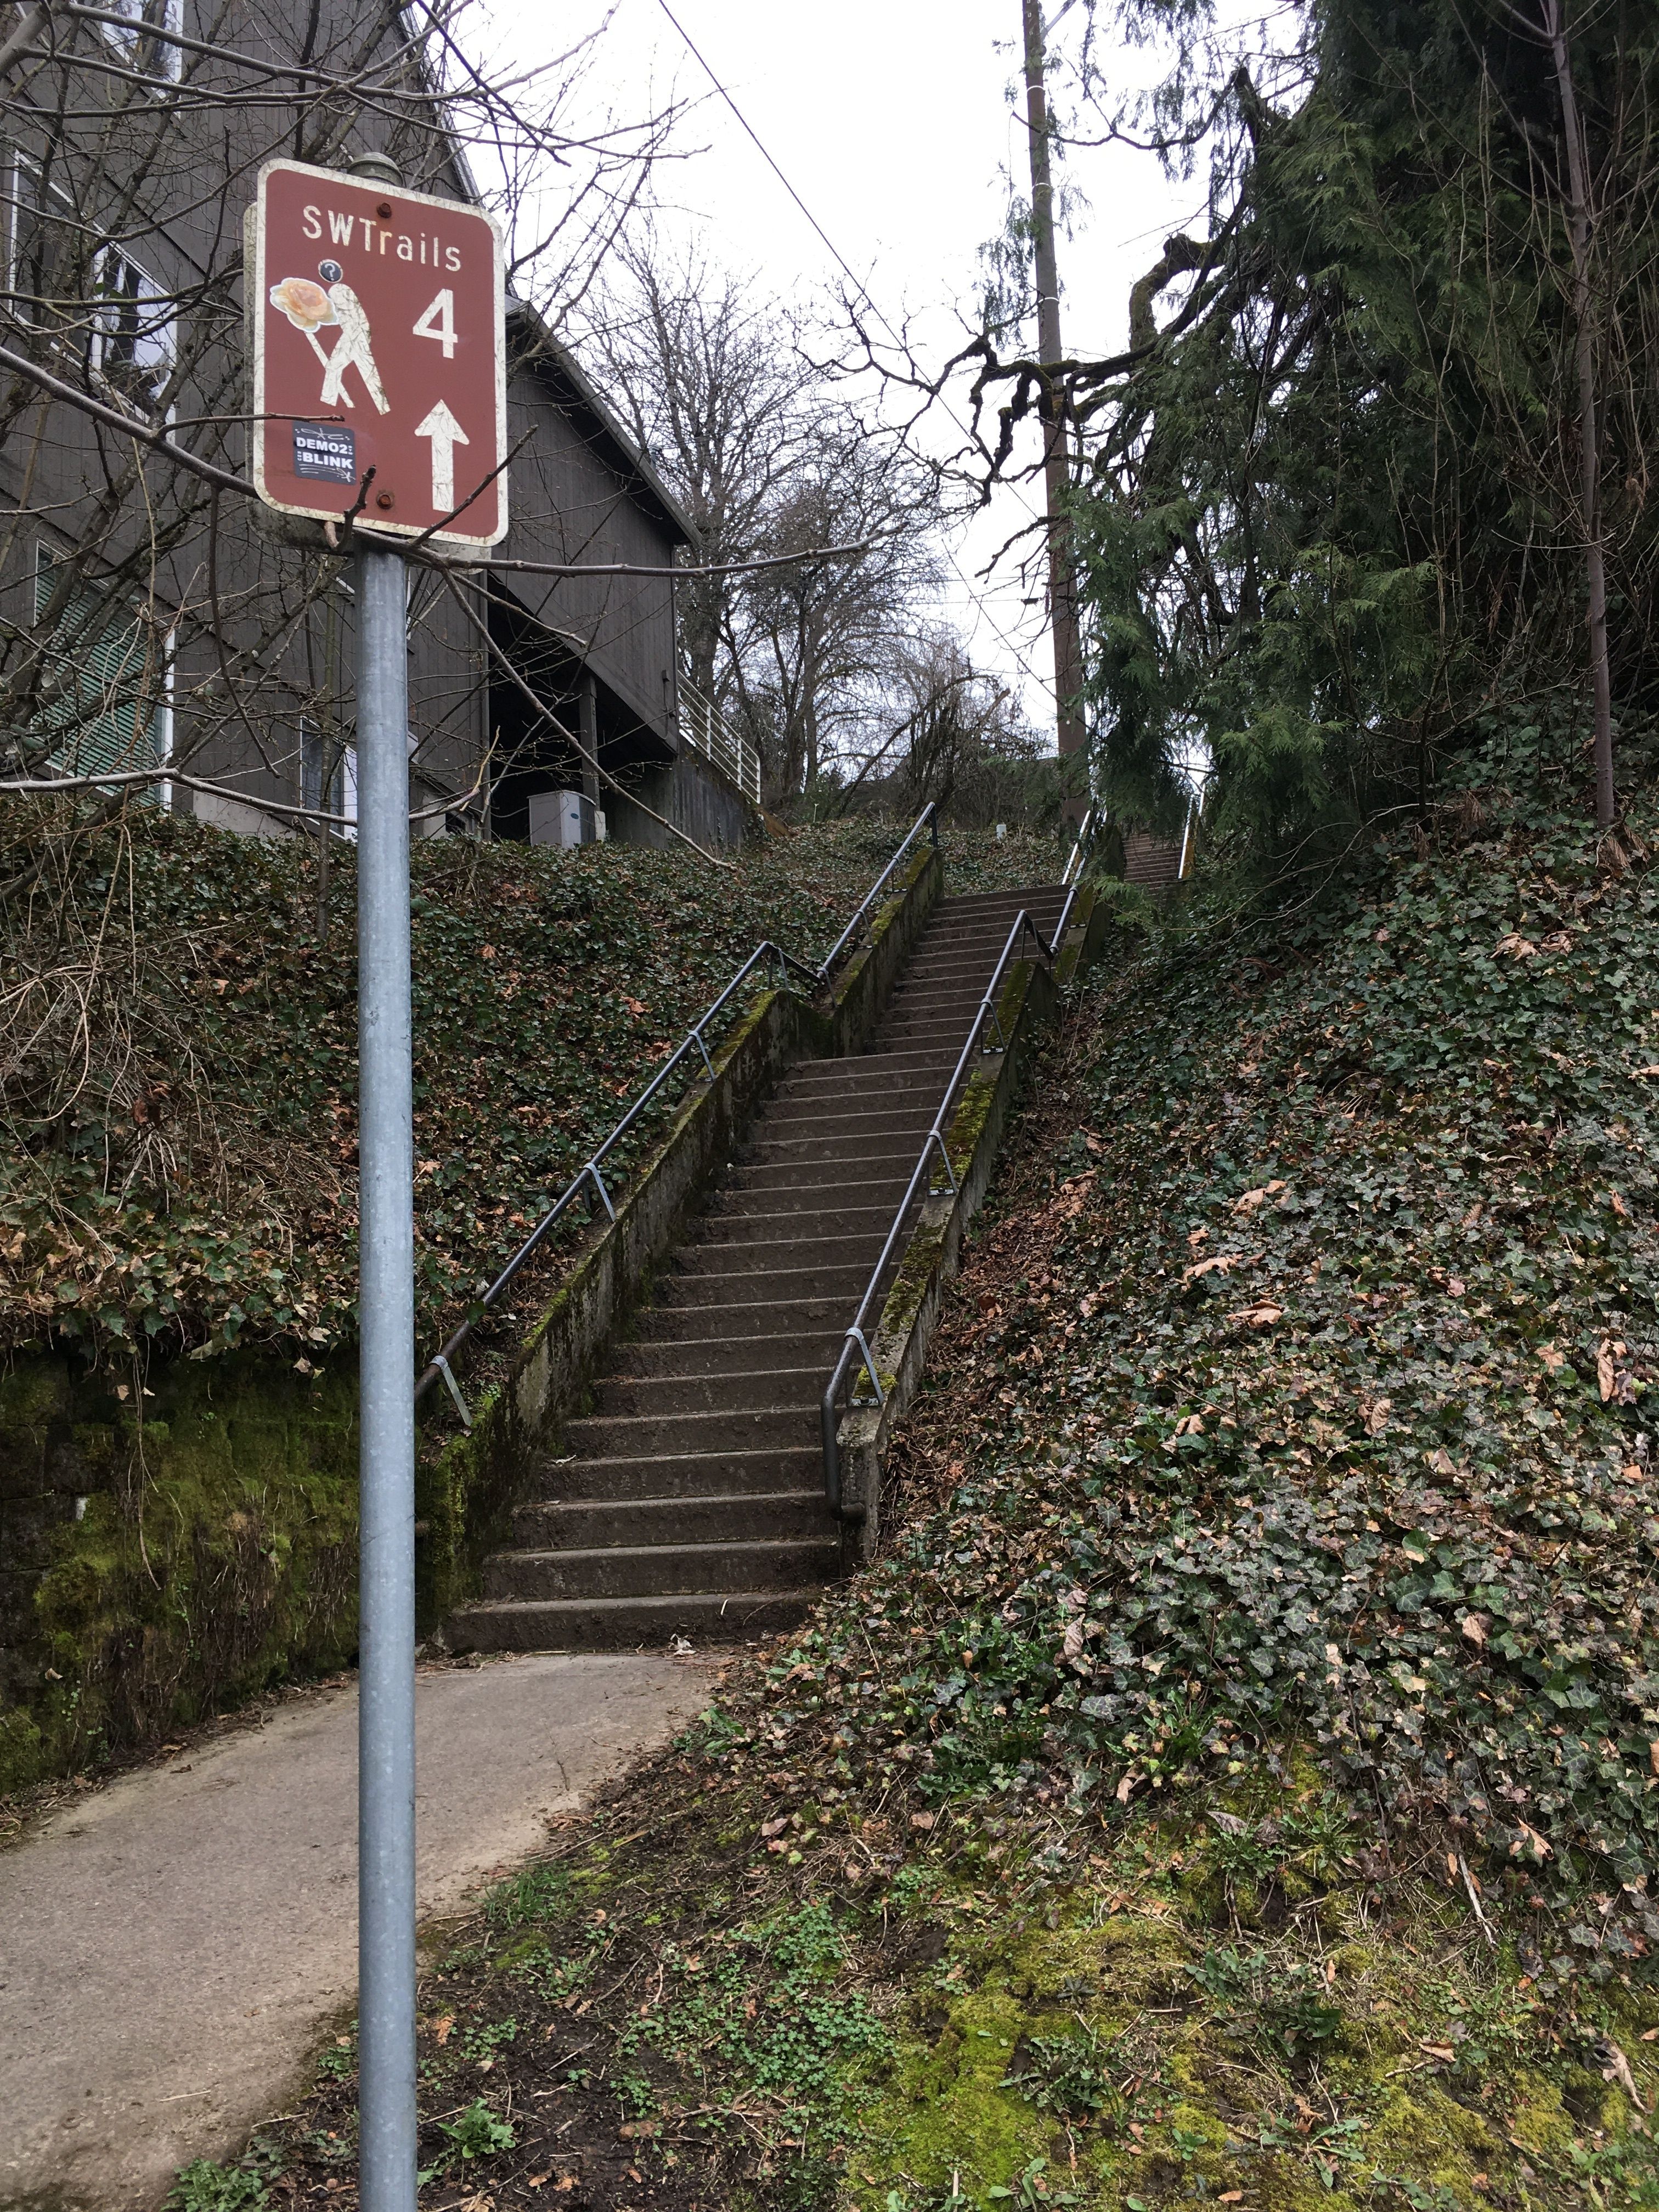 Concrete stairs with round metal handrails rise between banks of ivy. A brown sign says SW Trails 4 , with an arrow pointing up the steps.